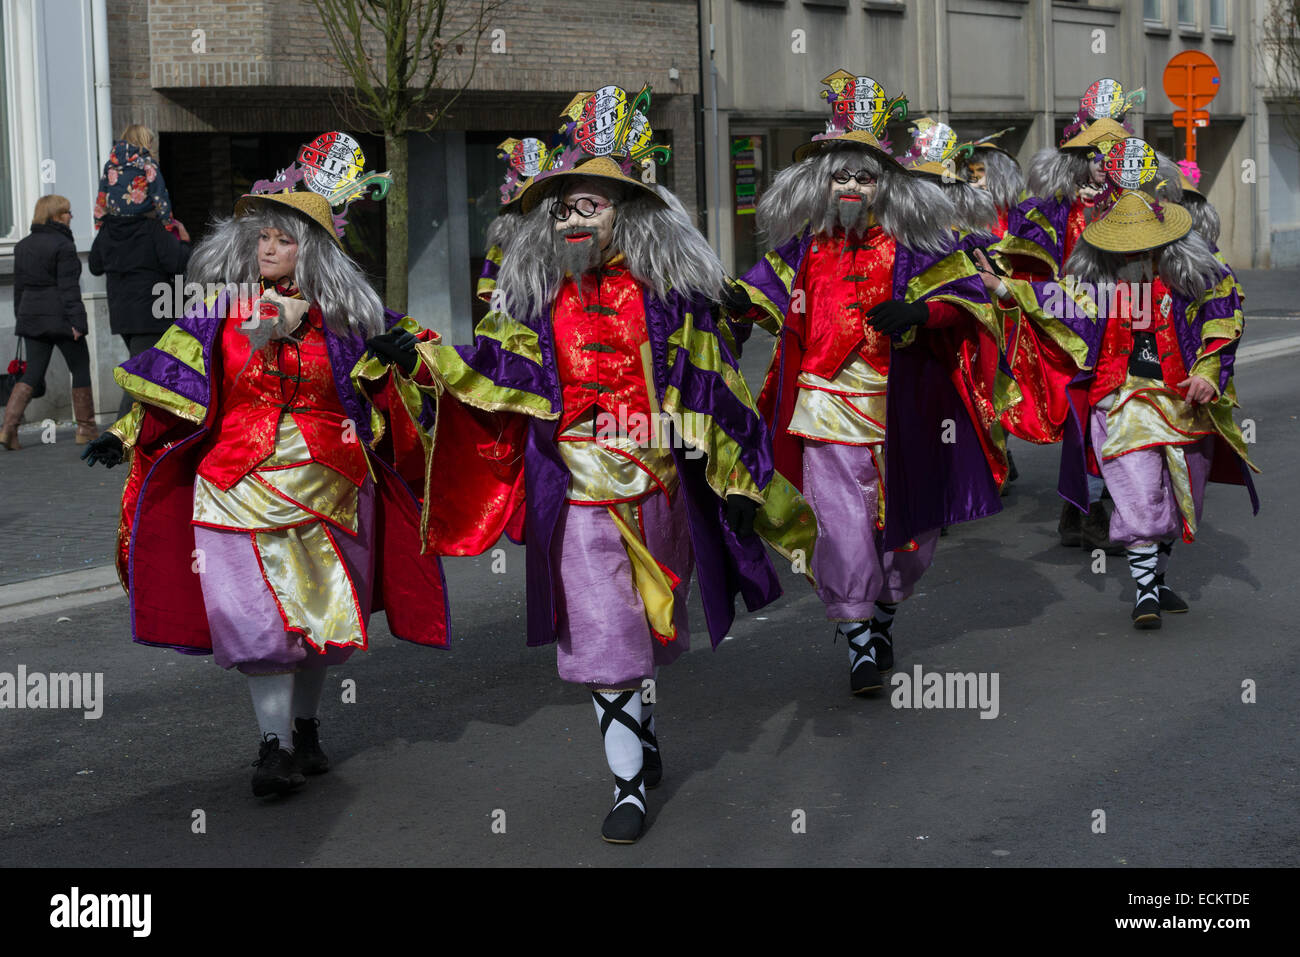 Carnival characters dressed up as racist Chinese stereotypes, in the traditionally offensive Aalst Carnival procession, Carnival Monday, Aalst, Belgium Stock Photo